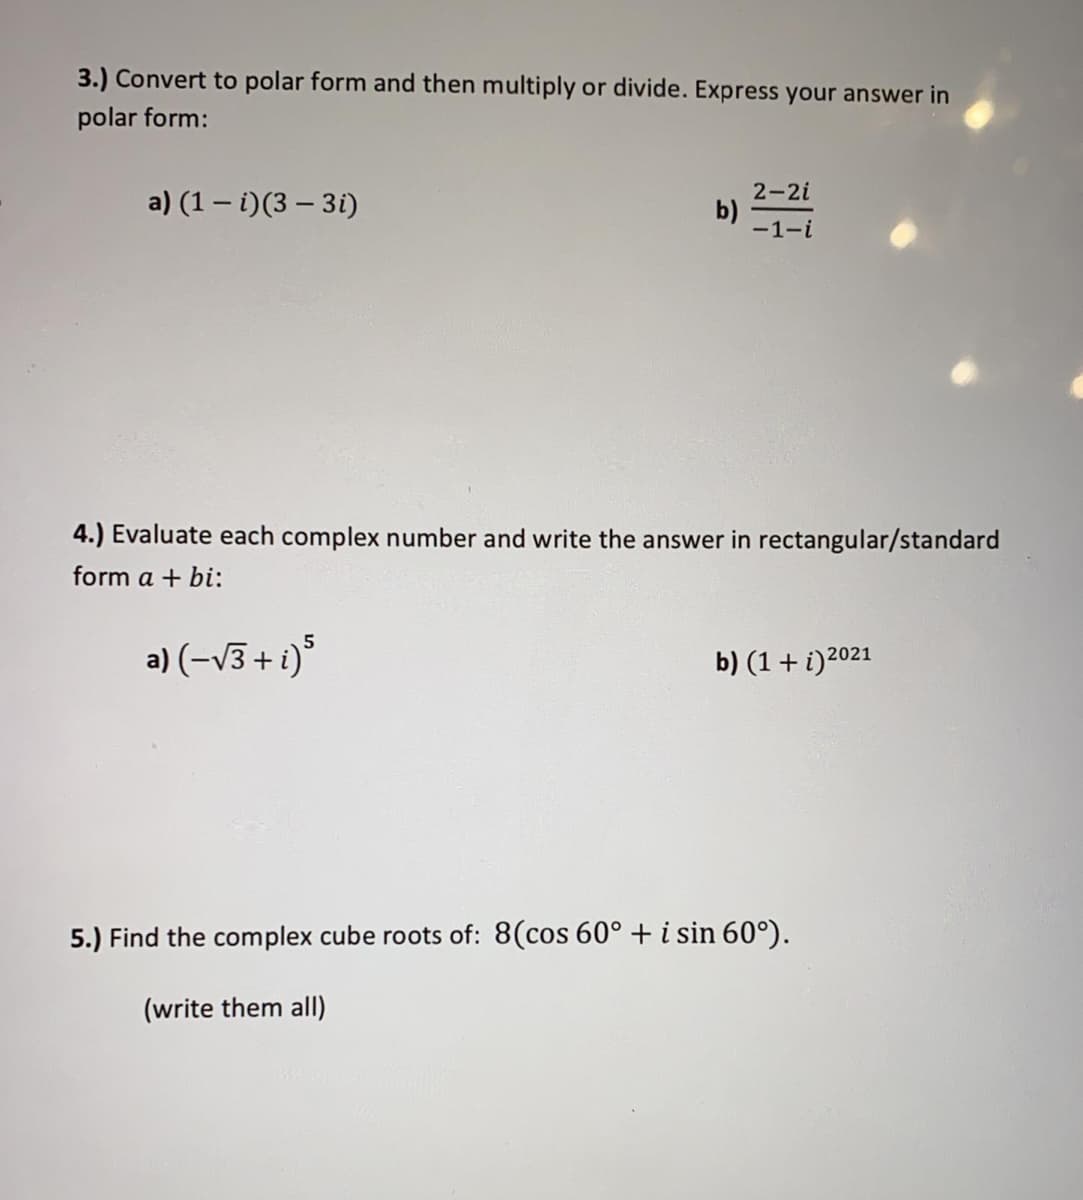 3.) Convert to polar form and then multiply or divide. Express your answer in
polar form:
2-2i
a) (1 – i)(3 – 3i)
b) 1-i
4.) Evaluate each complex number and write the answer in rectangular/standard
form a + bi:
5
a) (-v3 + i)
b) (1+ i)2021
5.) Find the complex cube roots of: 8(cos 60° + i sin 60°).
(write them all)
